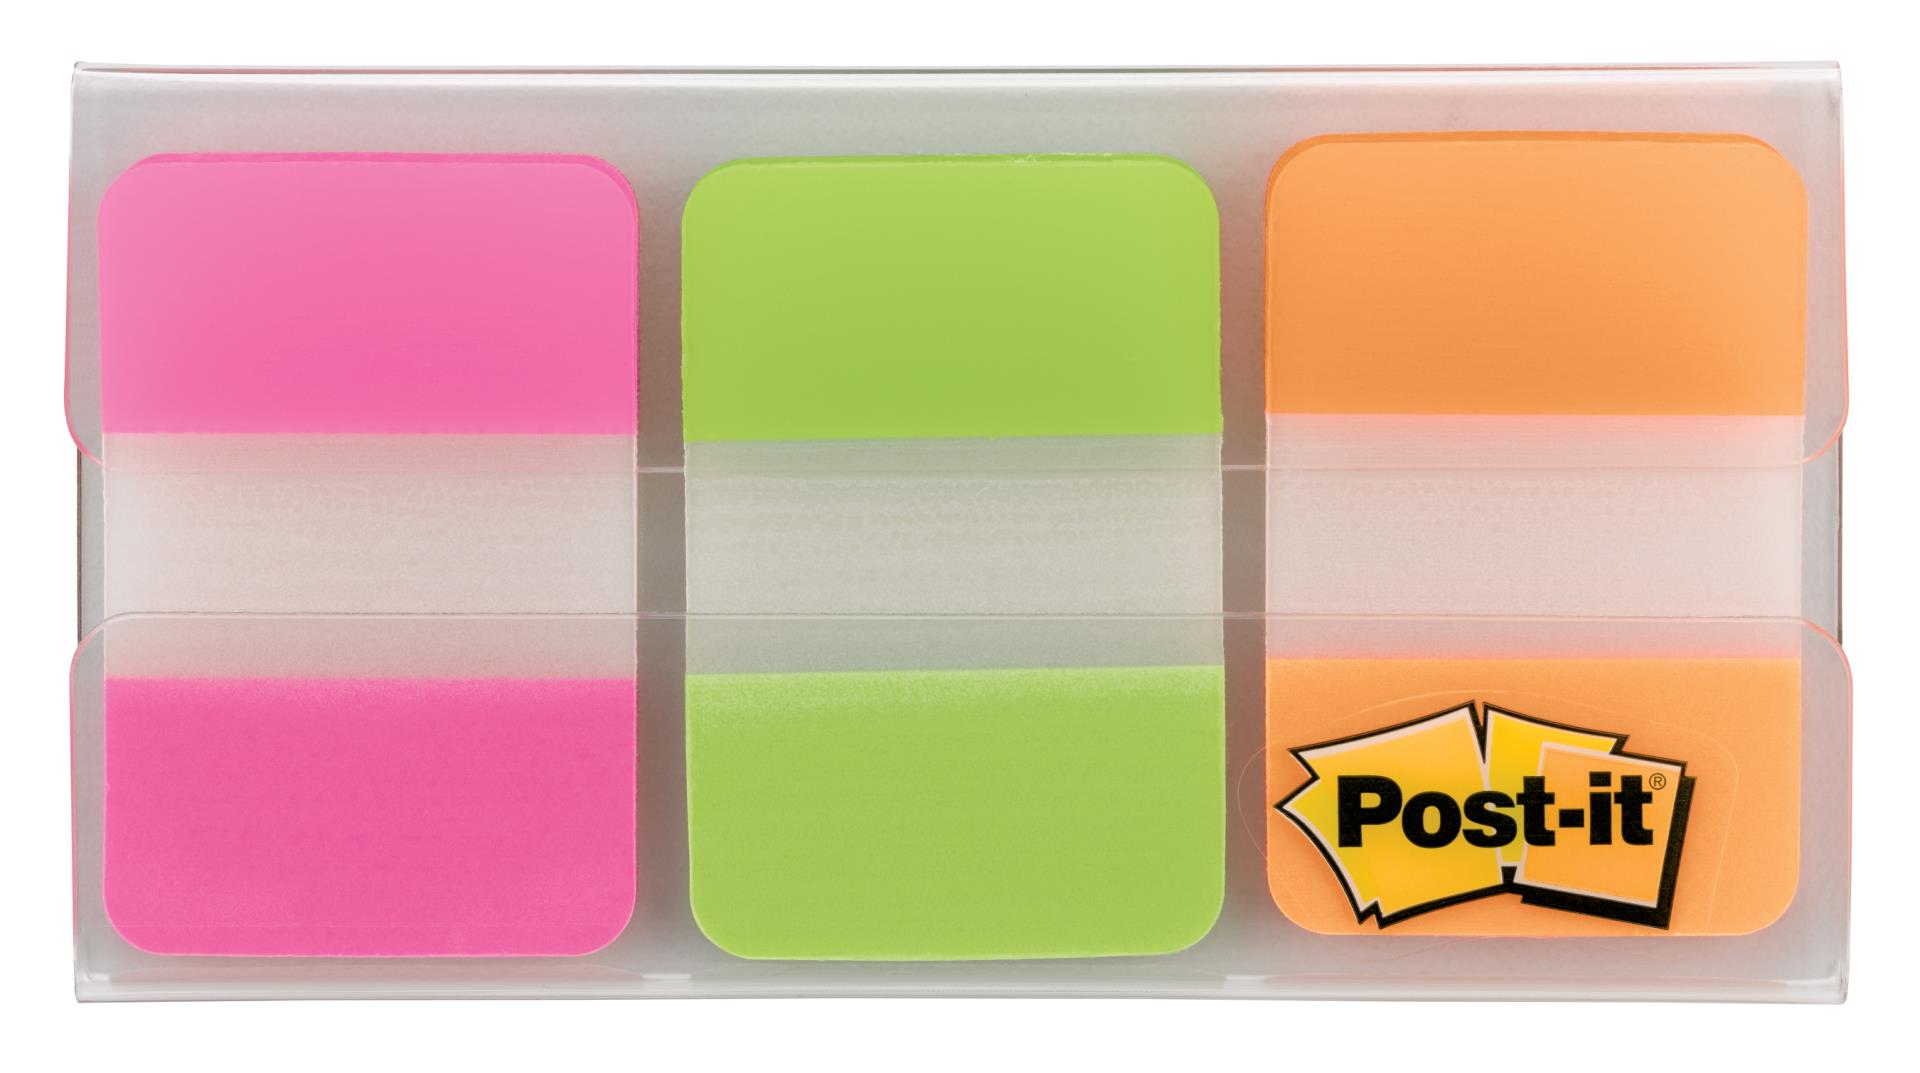 7000047885 - Post-it® Divider Tabs 686-PGOT, 1 in x 1.5 in (25,4 mm x 38,1 mm)